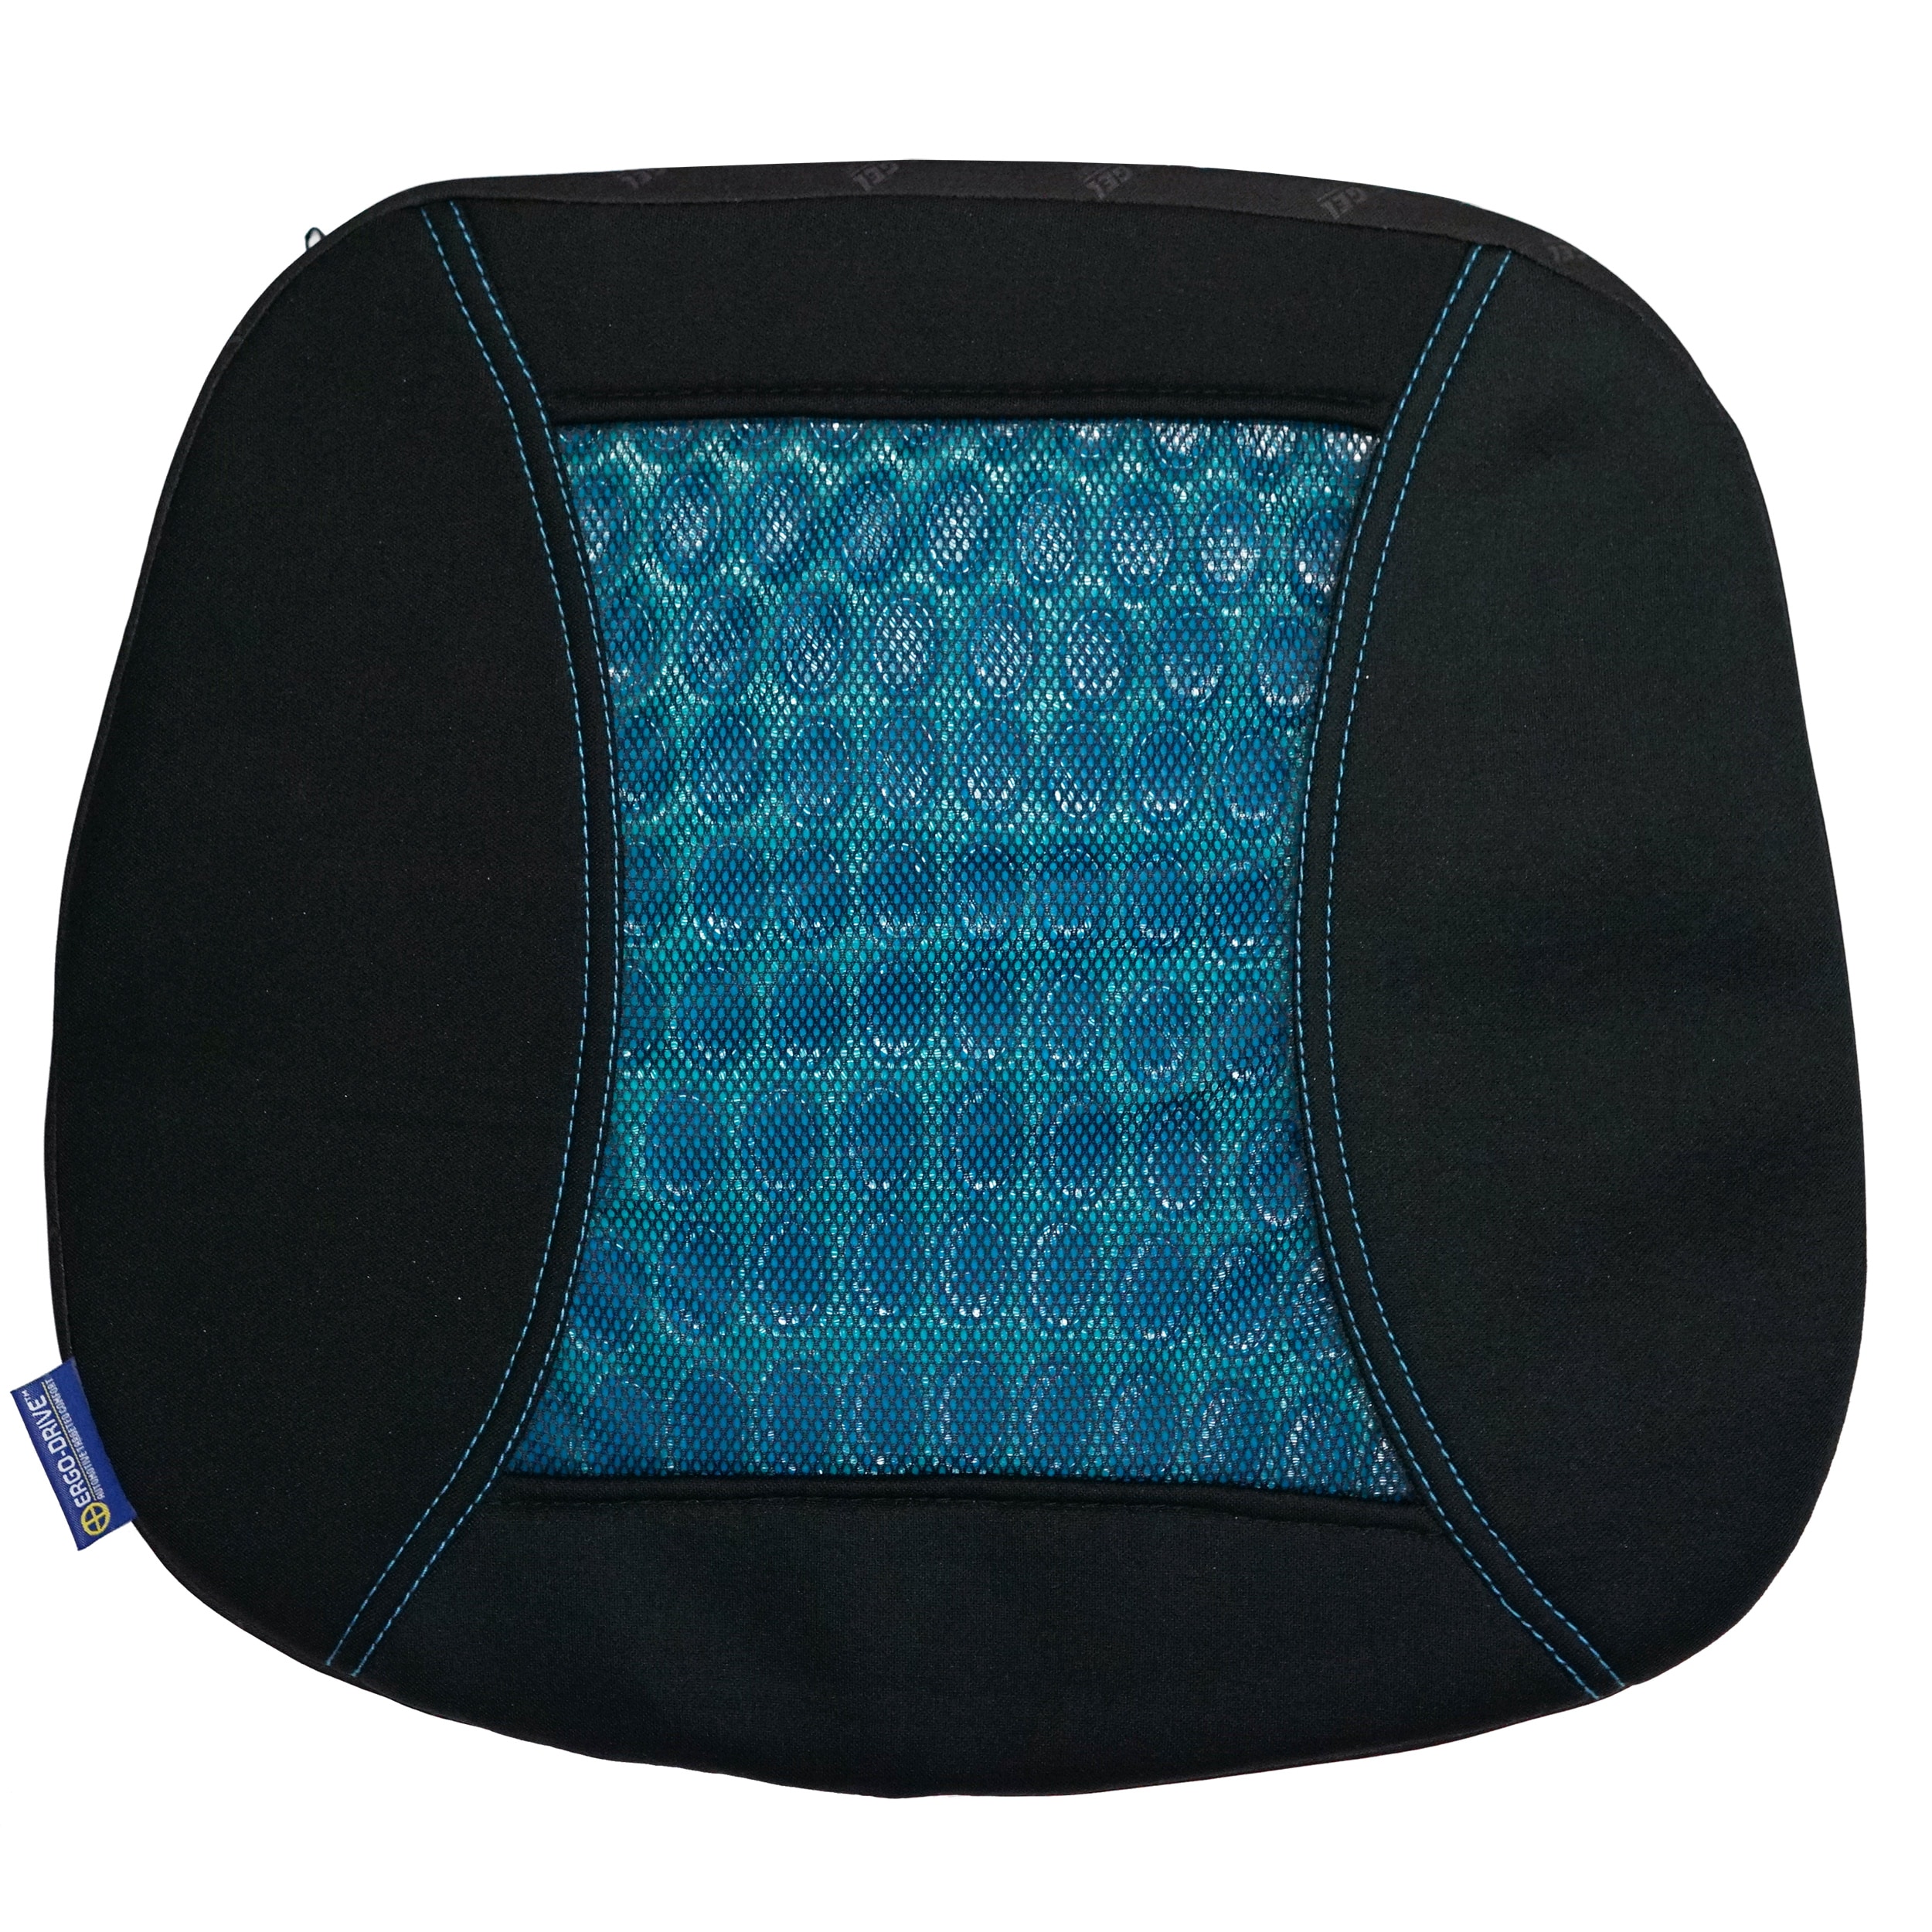 Car Cushions For Driving Ergonomic Nonwoven Cushion For Car Seat